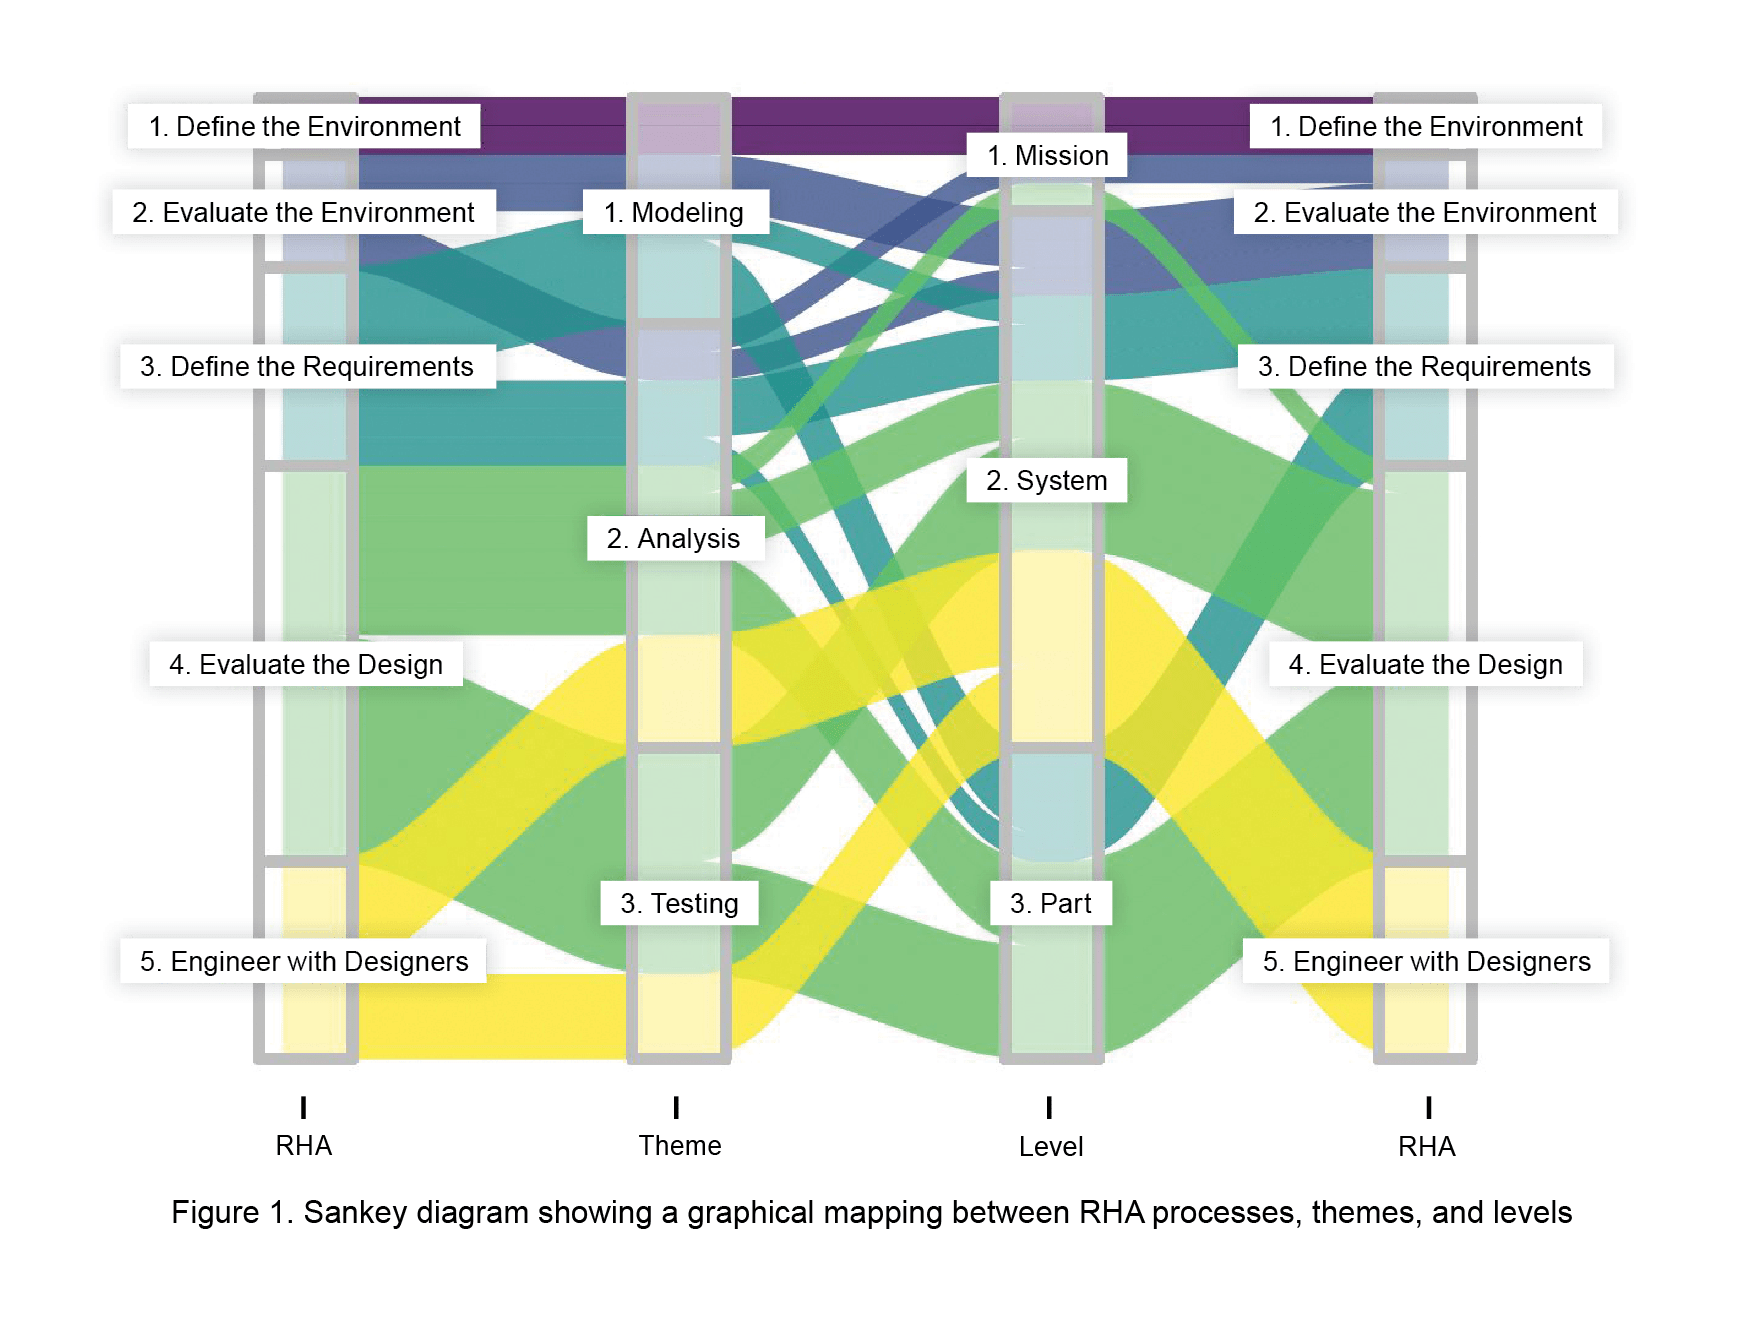 Sankey diagram showing a graphical mapping between RHA processes, themes, and levels